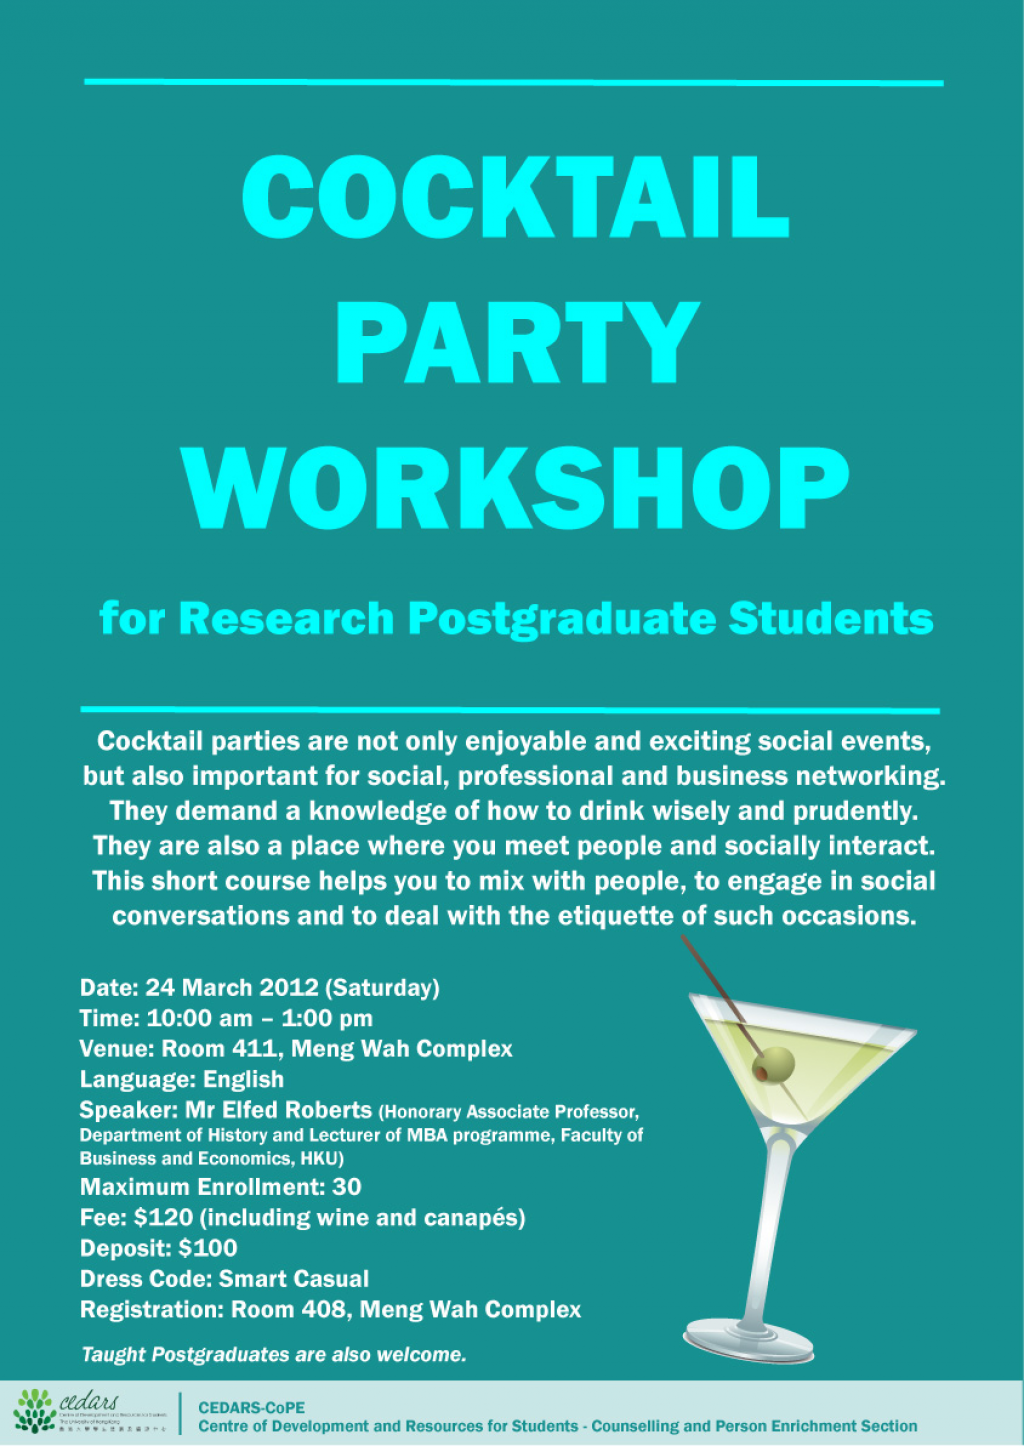 Cocktail Party Workshop for Research Postgraduate Students